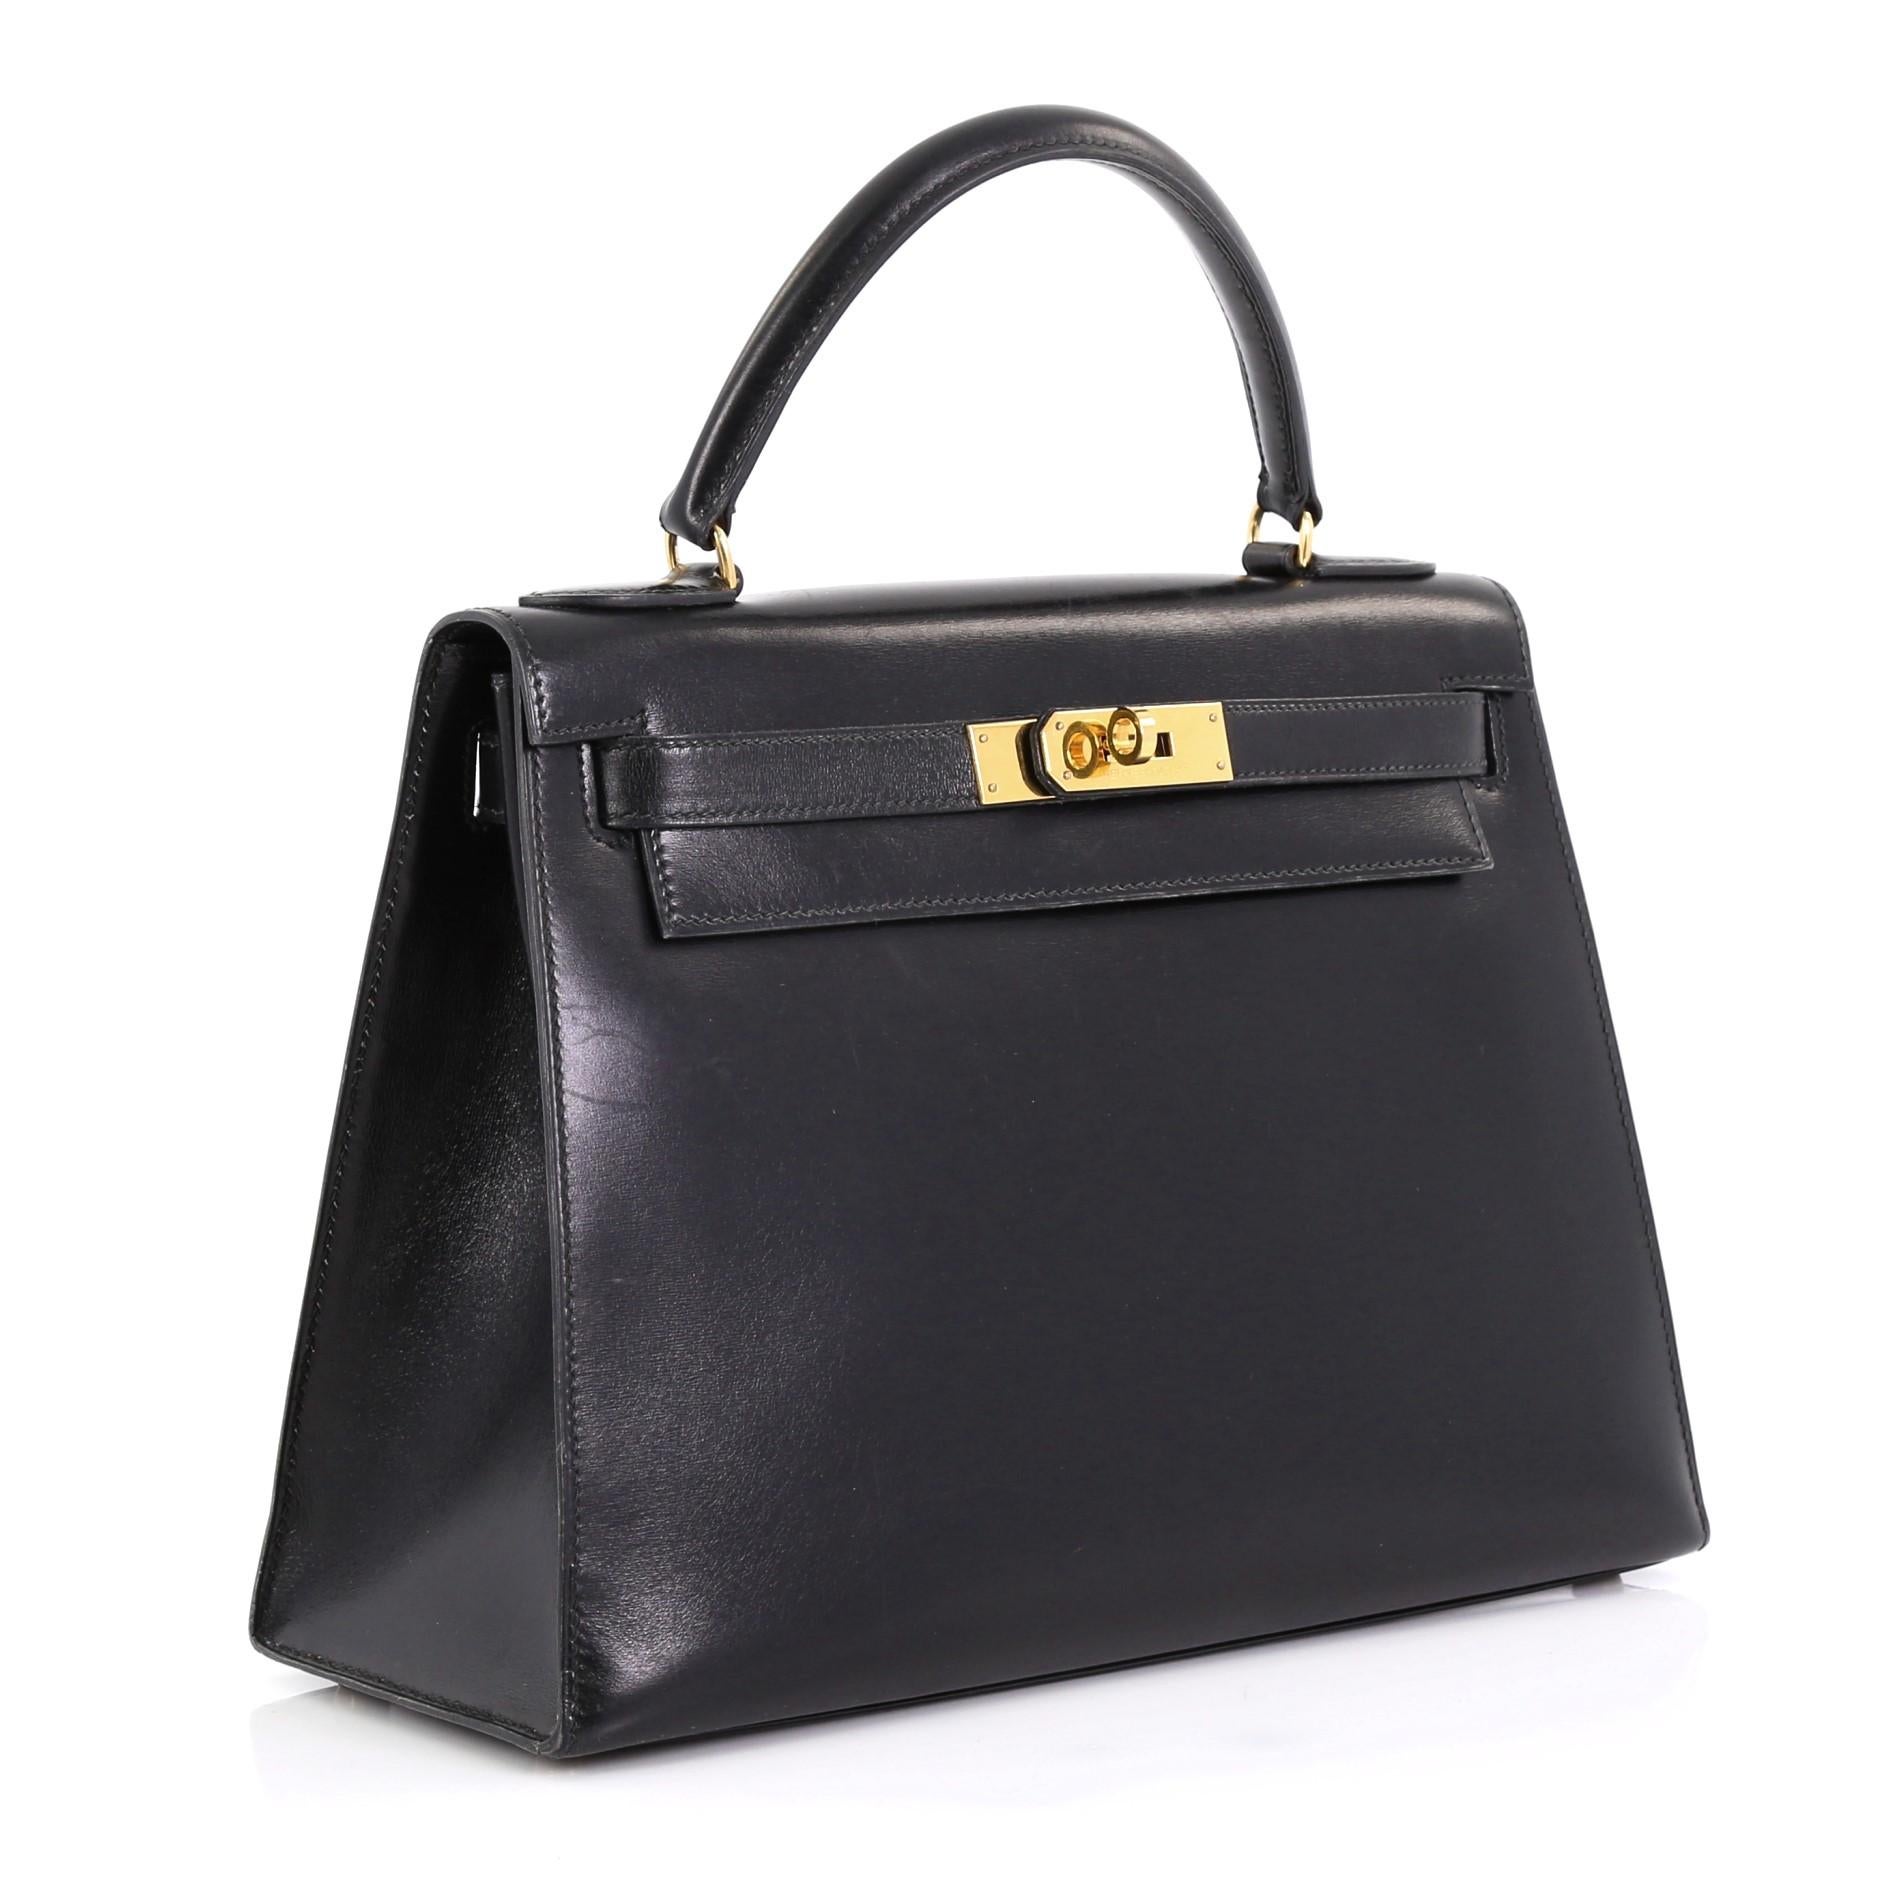 This Hermes Kelly Handbag Noir Box Calf with Gold Hardware 28, crafted in Noir black Box Calf leather, features a single rolled top handle, protective base studs, and gold hardware. Its turn-lock closure opens to a Noir black Chevre leather interior